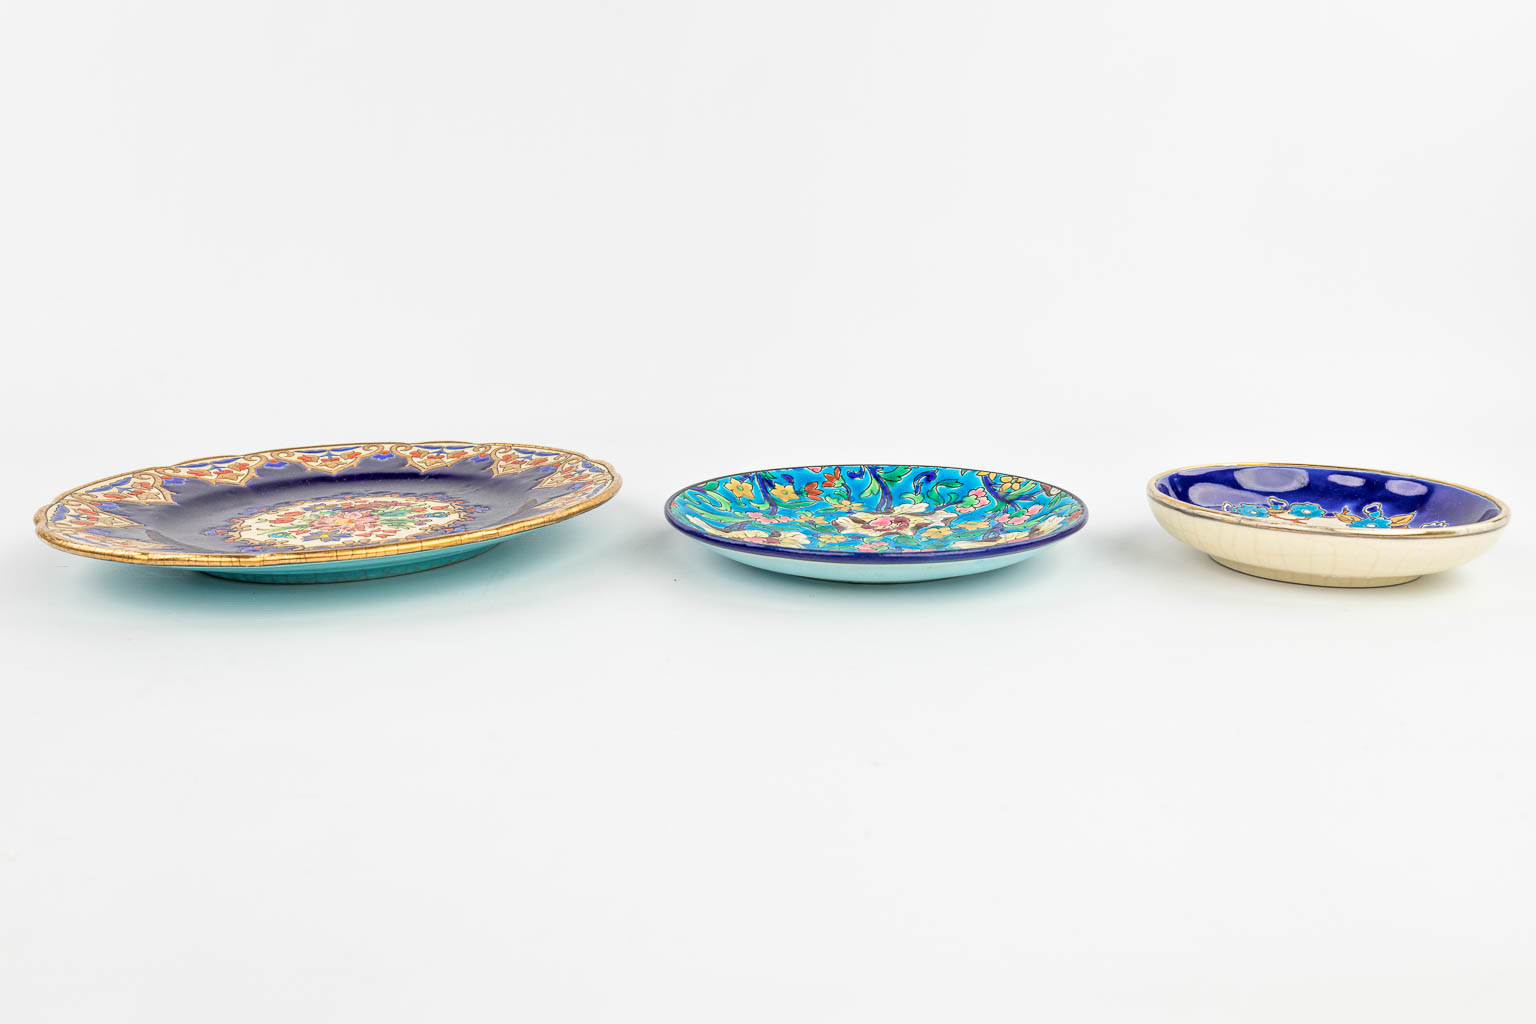 A collection of 15 items made of ceramics by Longwy and in the style of Longwy. 